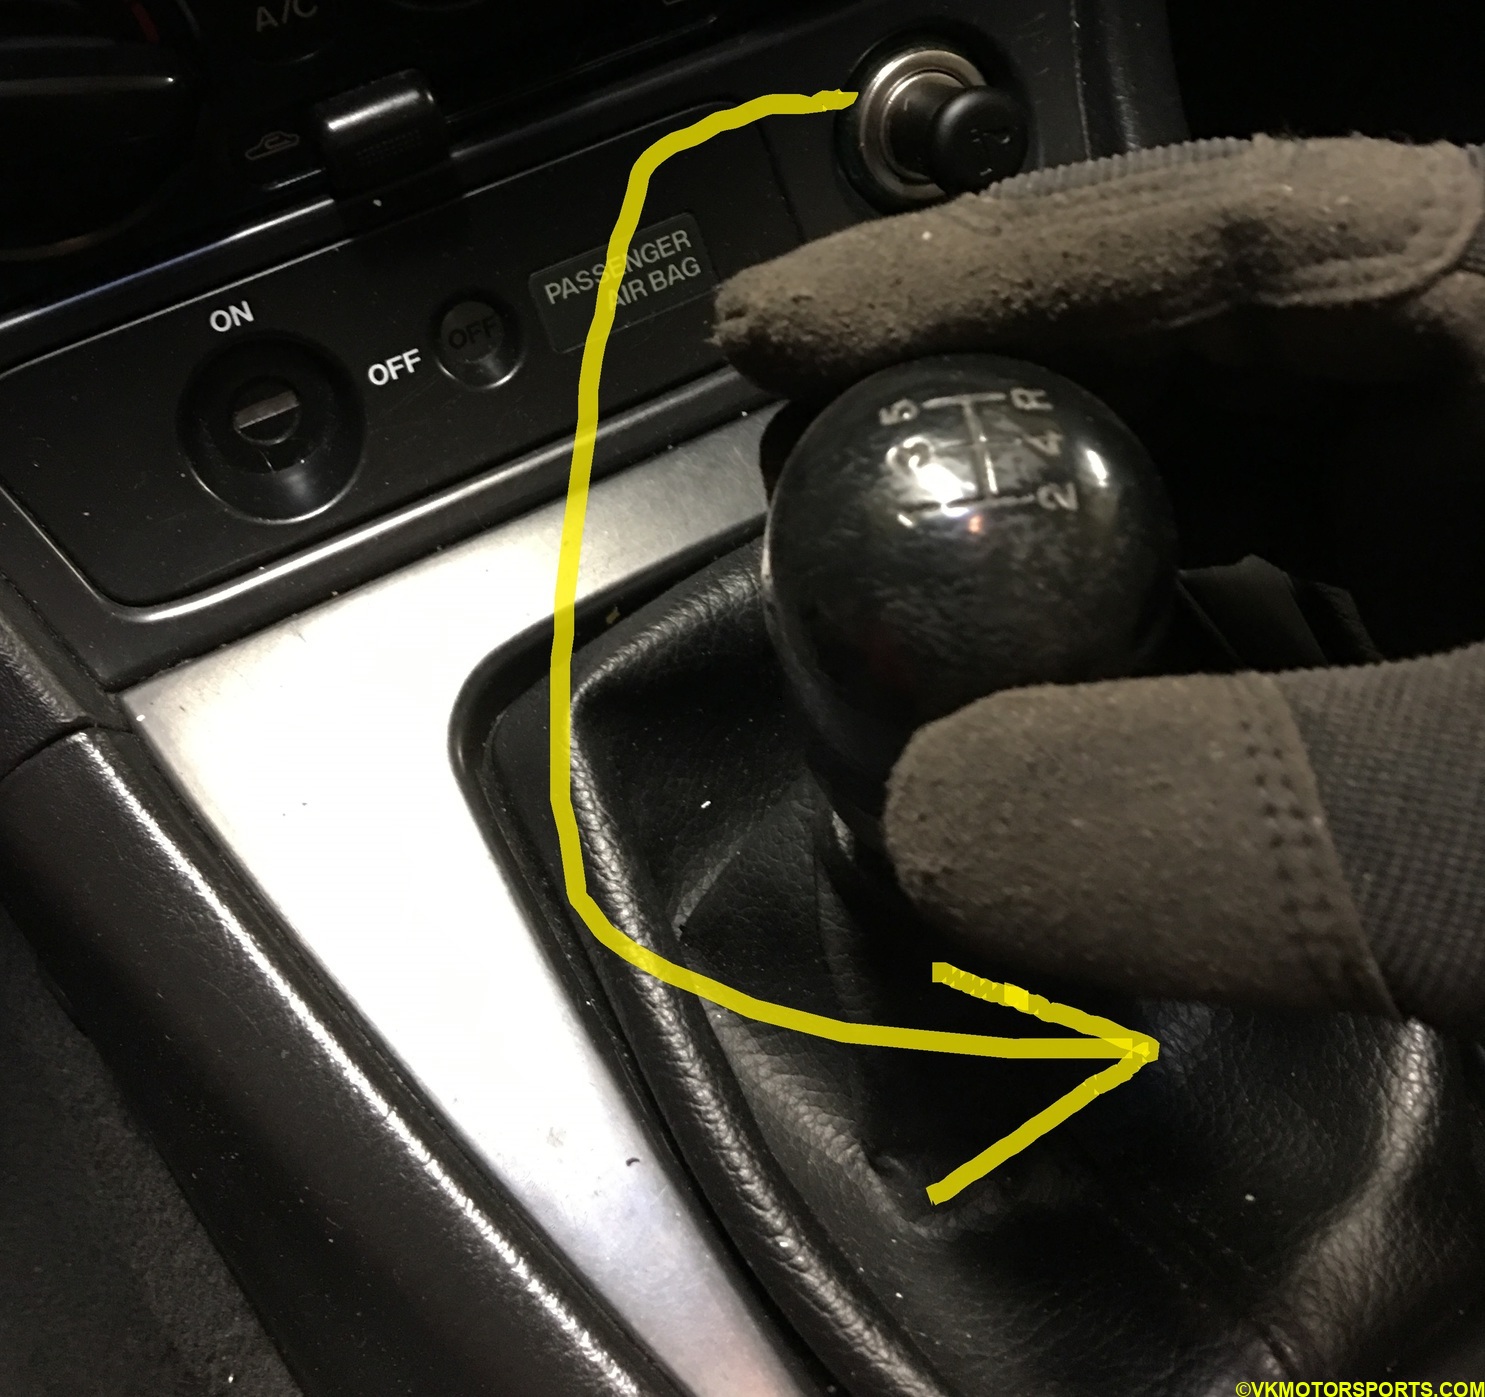 Figure 4. Counter-clockwise rotate the shift knob